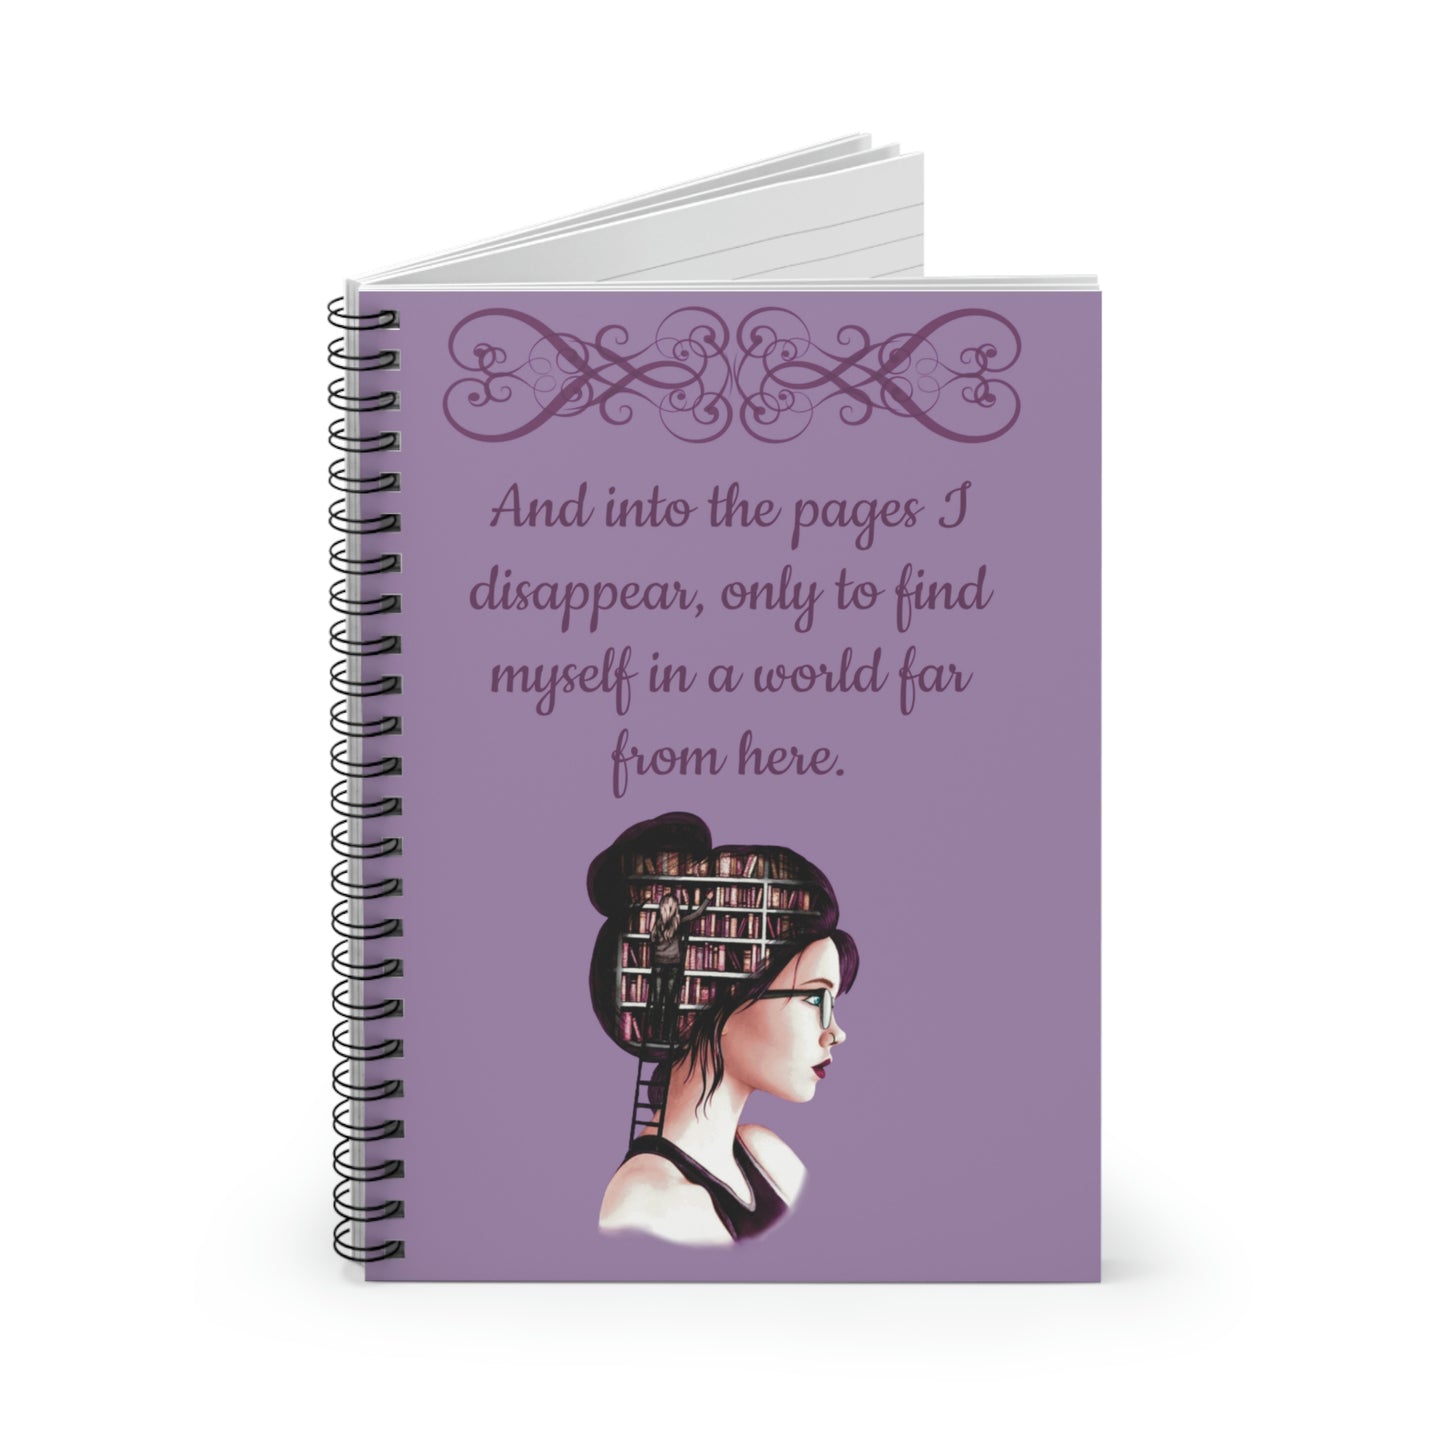 Disappear into the pages Spiral Notebook